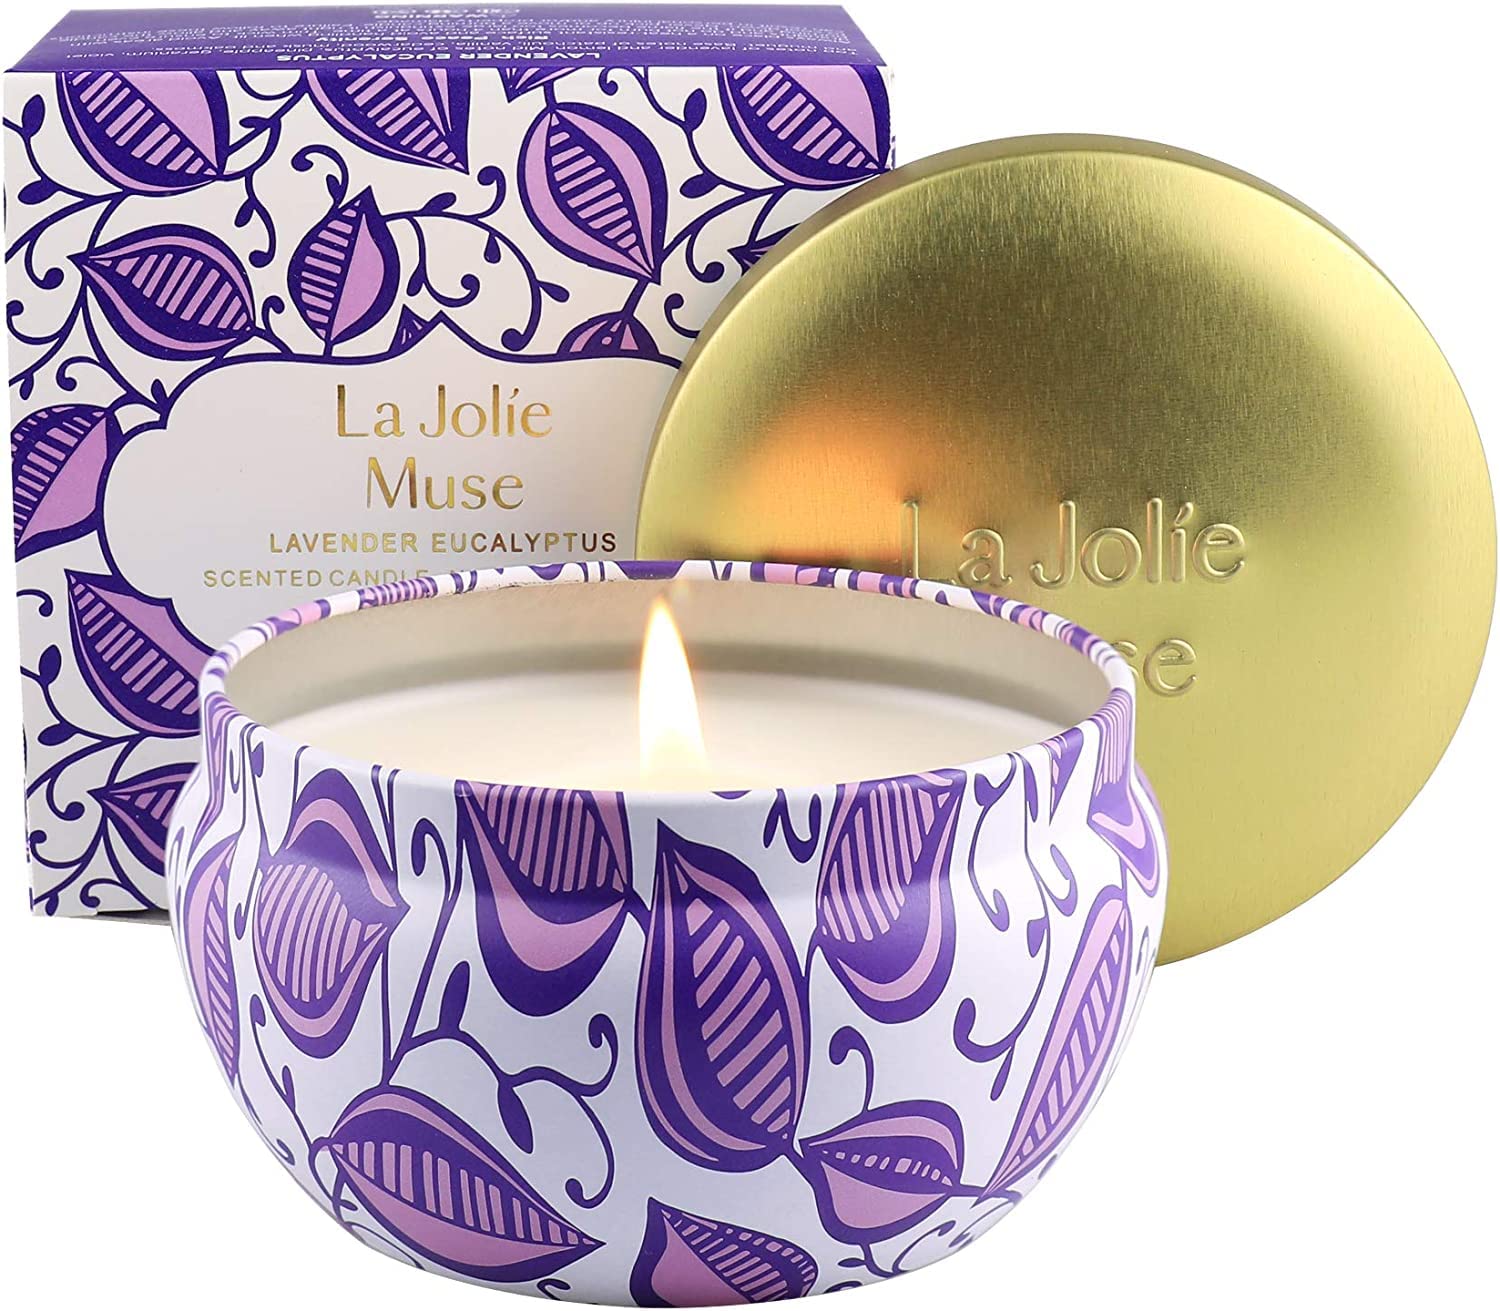 La Jolie Muse Scented Candles Vanilla Coconut Candle Soy Wax, Gold Travel Tin